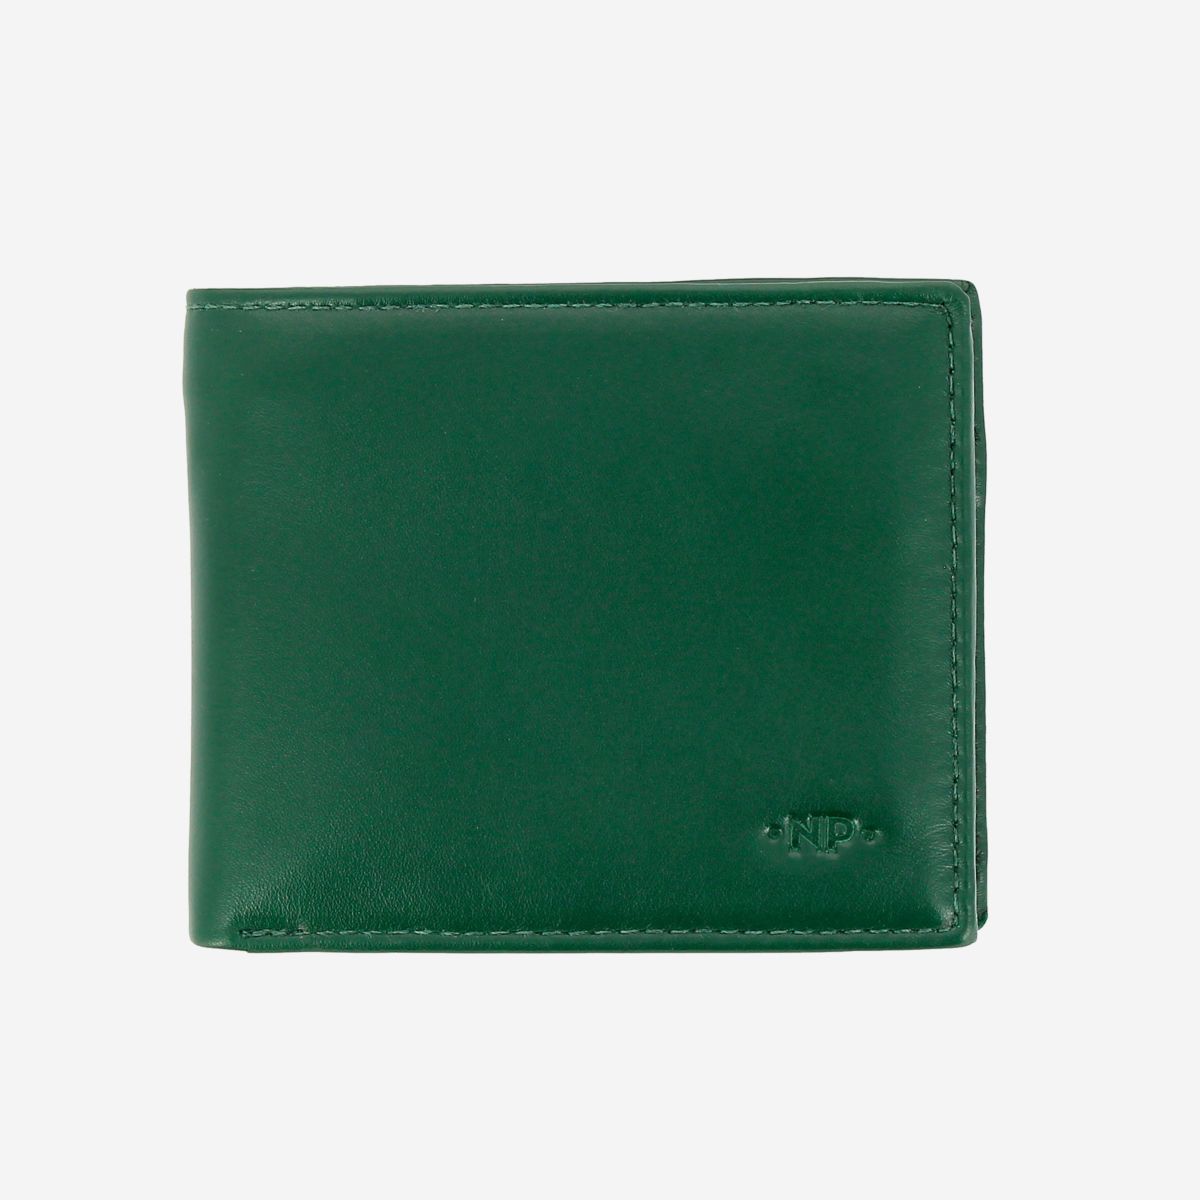 Wallet For Men Ariat|unisex Genuine Leather Coin Purse - Cowhide Zippered  Wallet For Men & Women